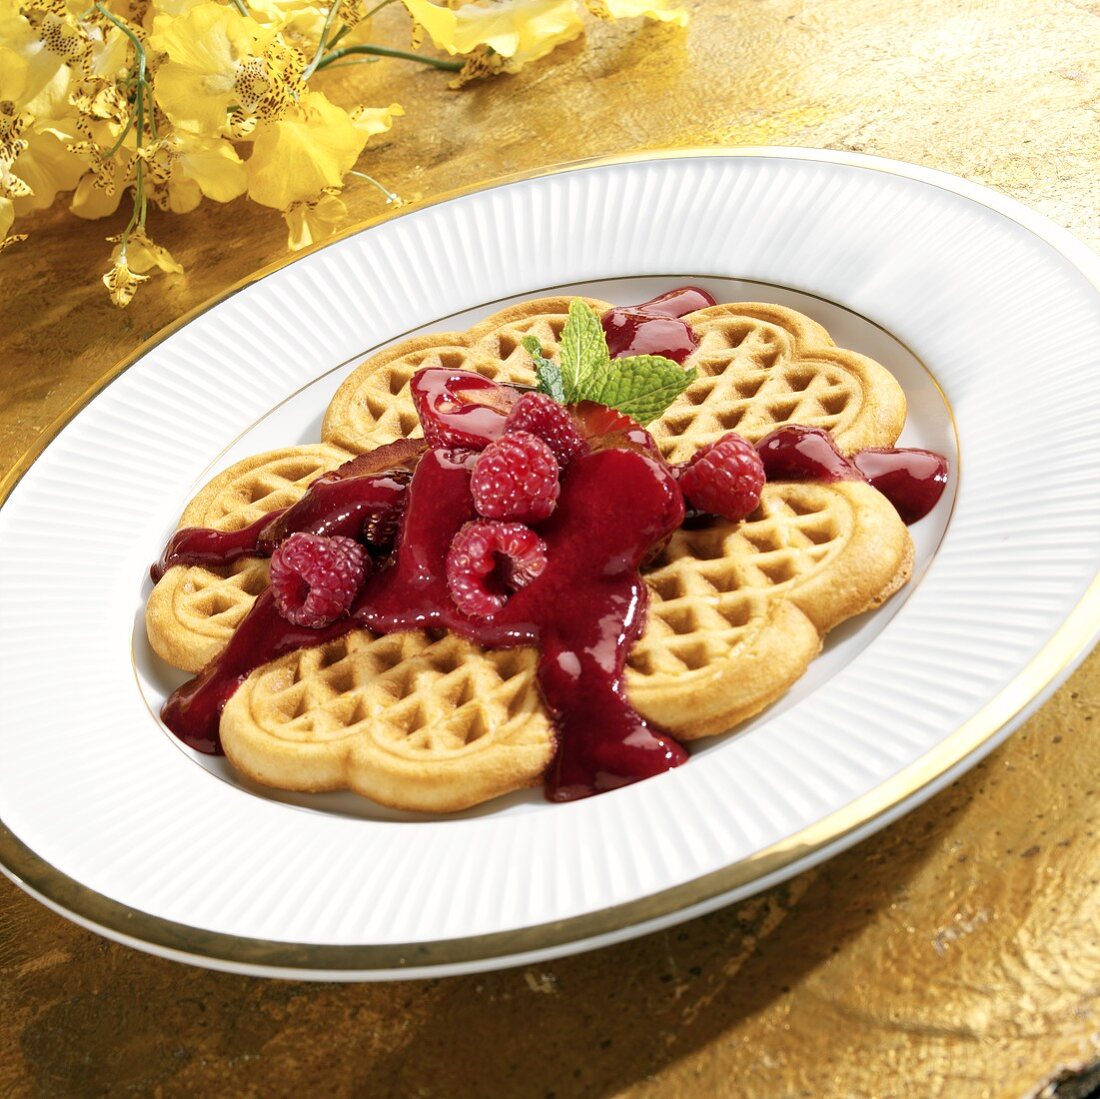 Heart-shaped waffles with berries and fruit sauce